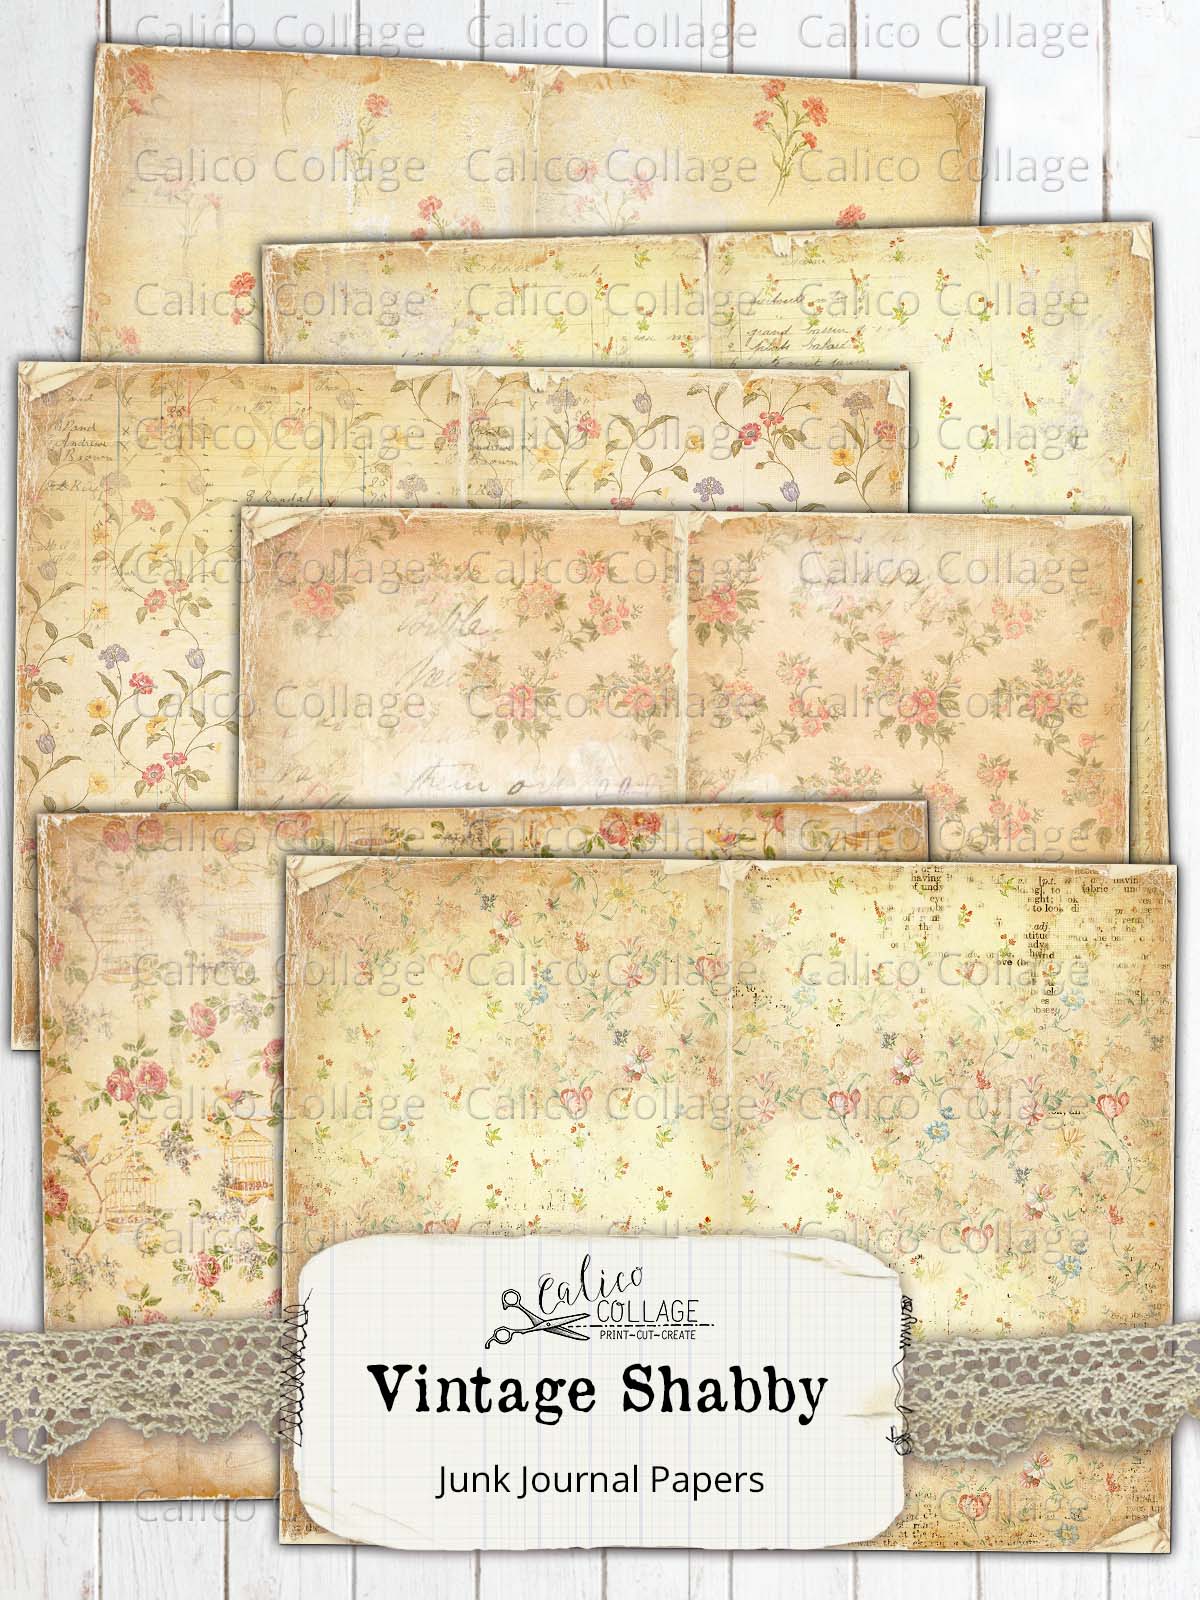 Vintage Shabby Rose Junk Journal Papers